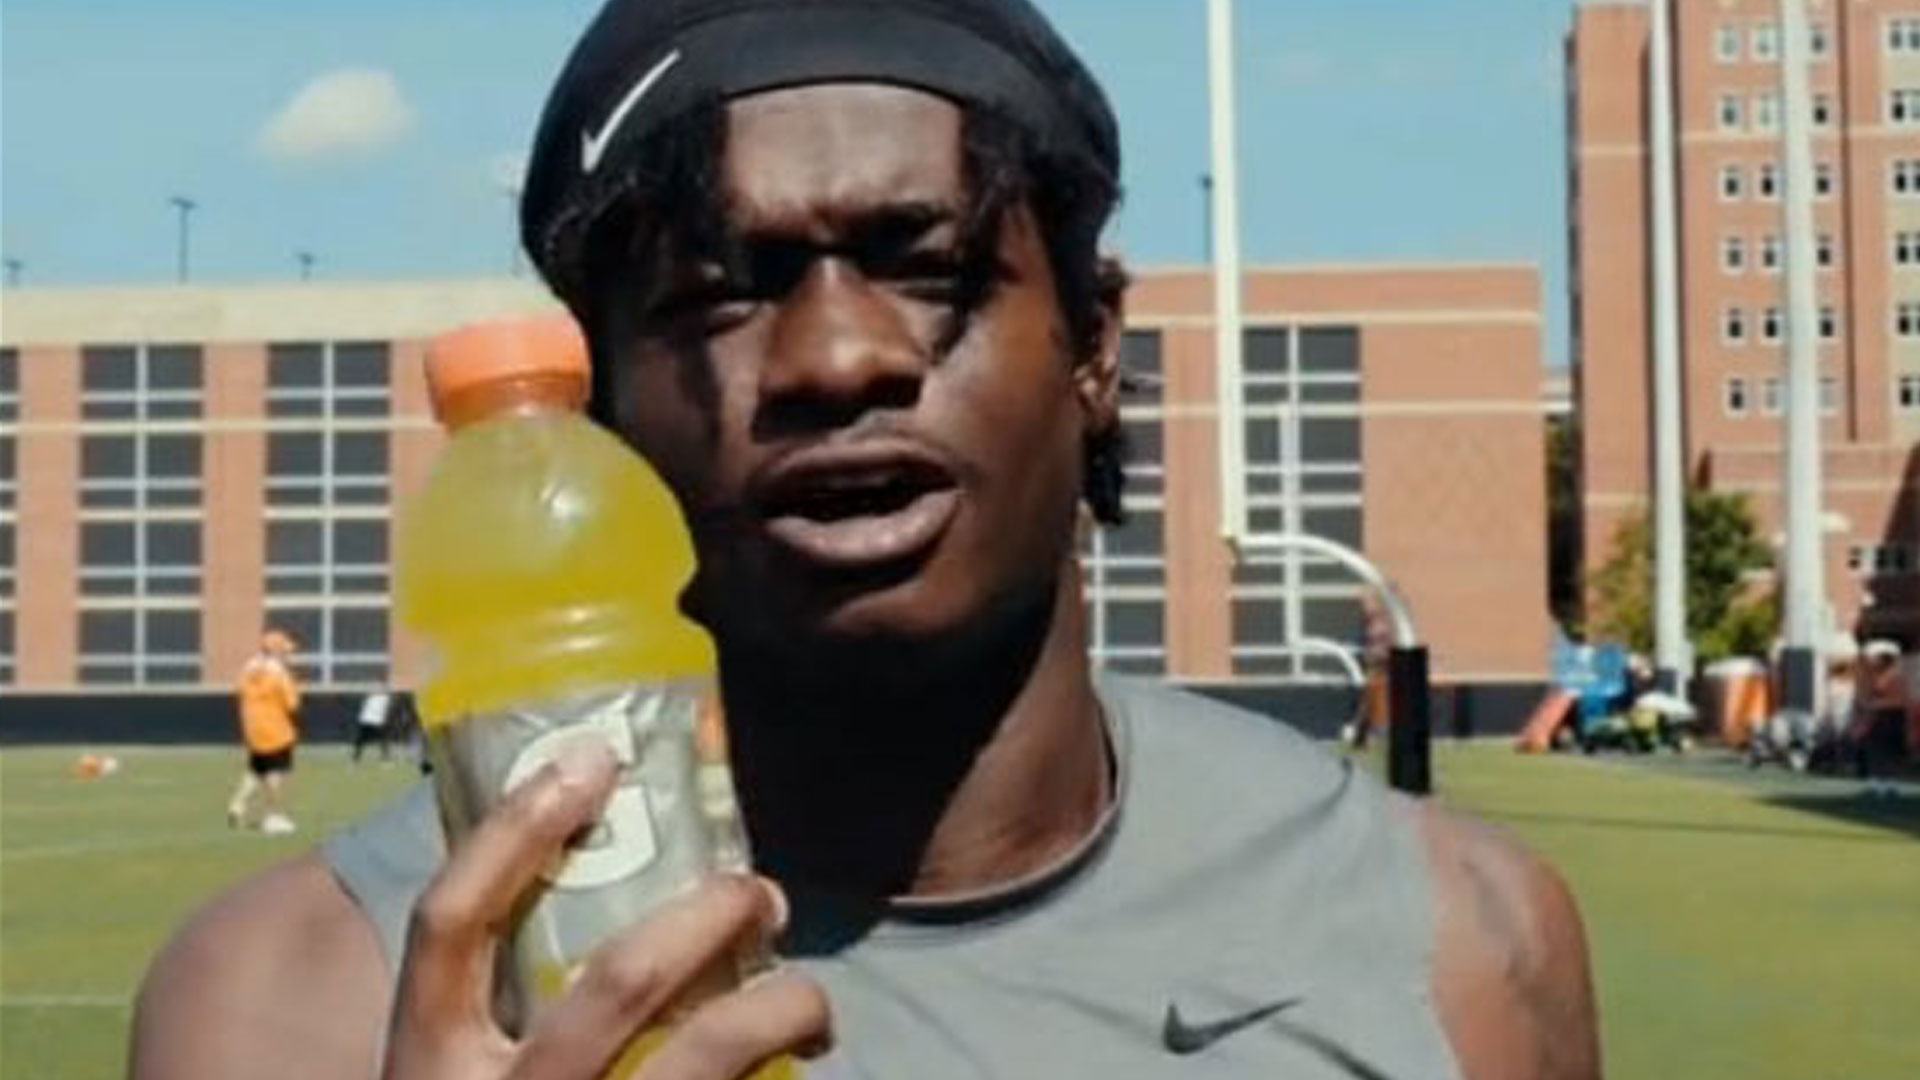 Debate on whether popular sports drink Gatorade is green or yellow goes viral & it's completely divided people